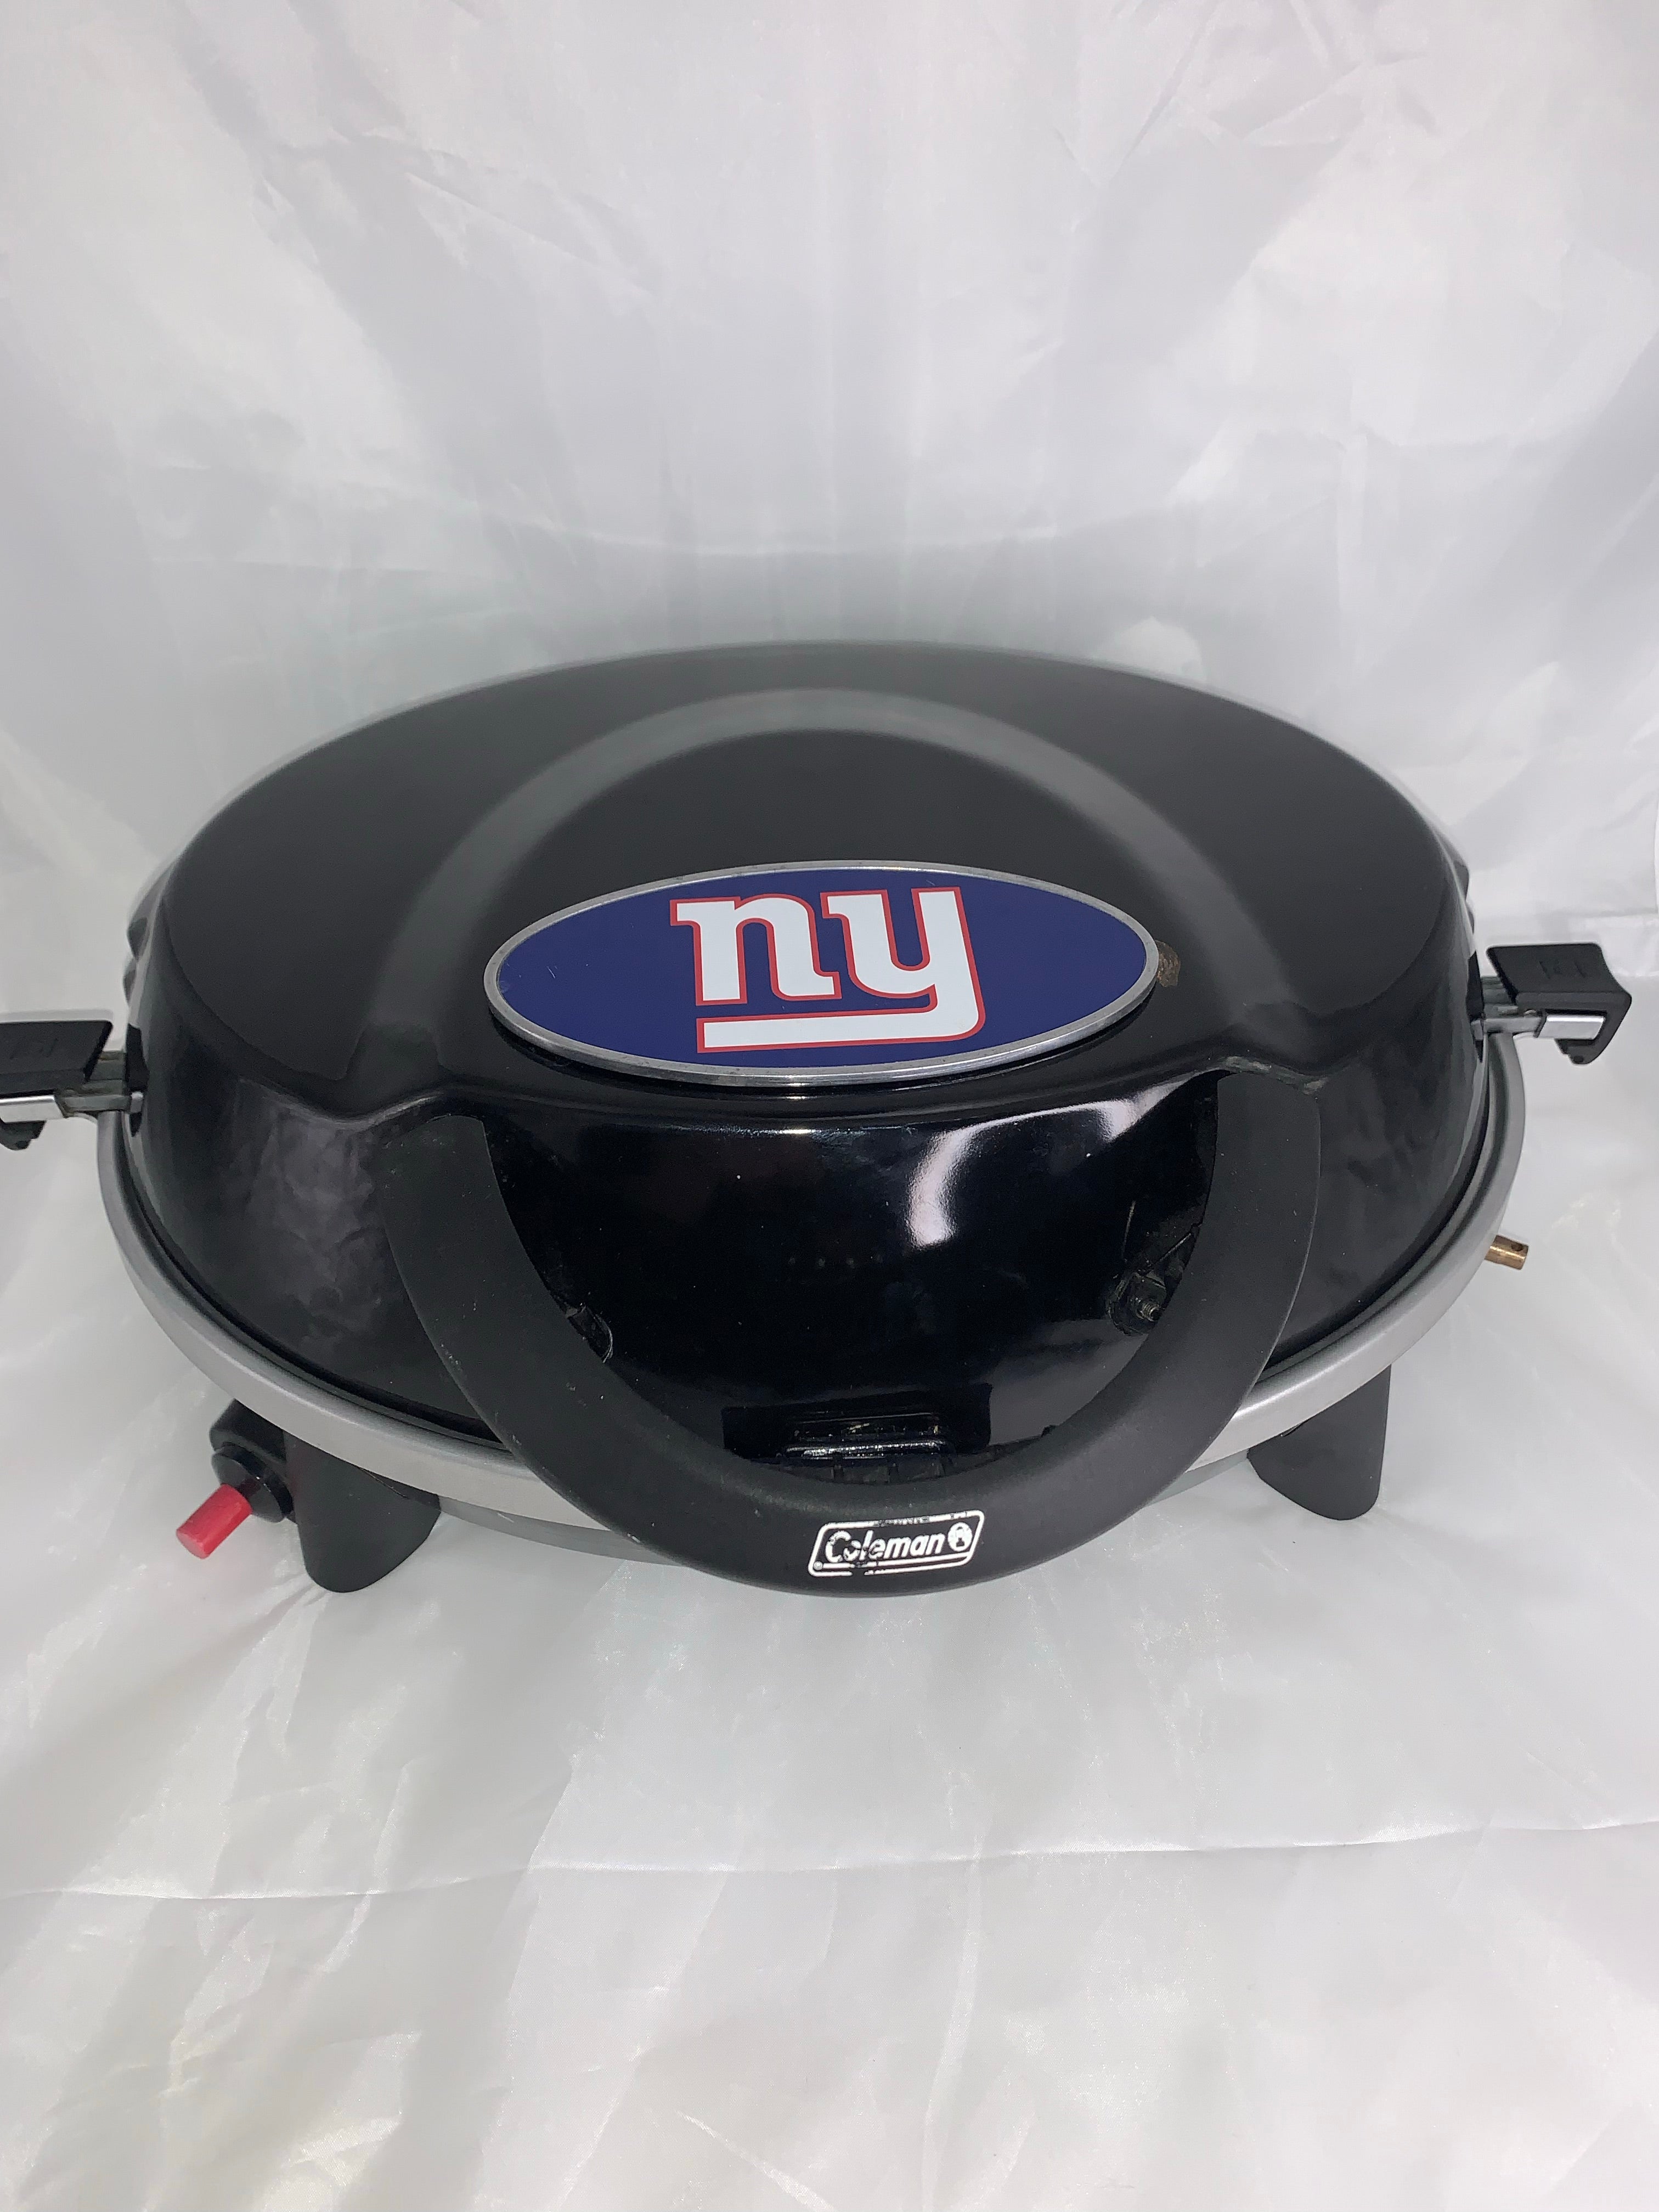 Coleman Instastart Tailgate Grill Propane NY Giants NFL official